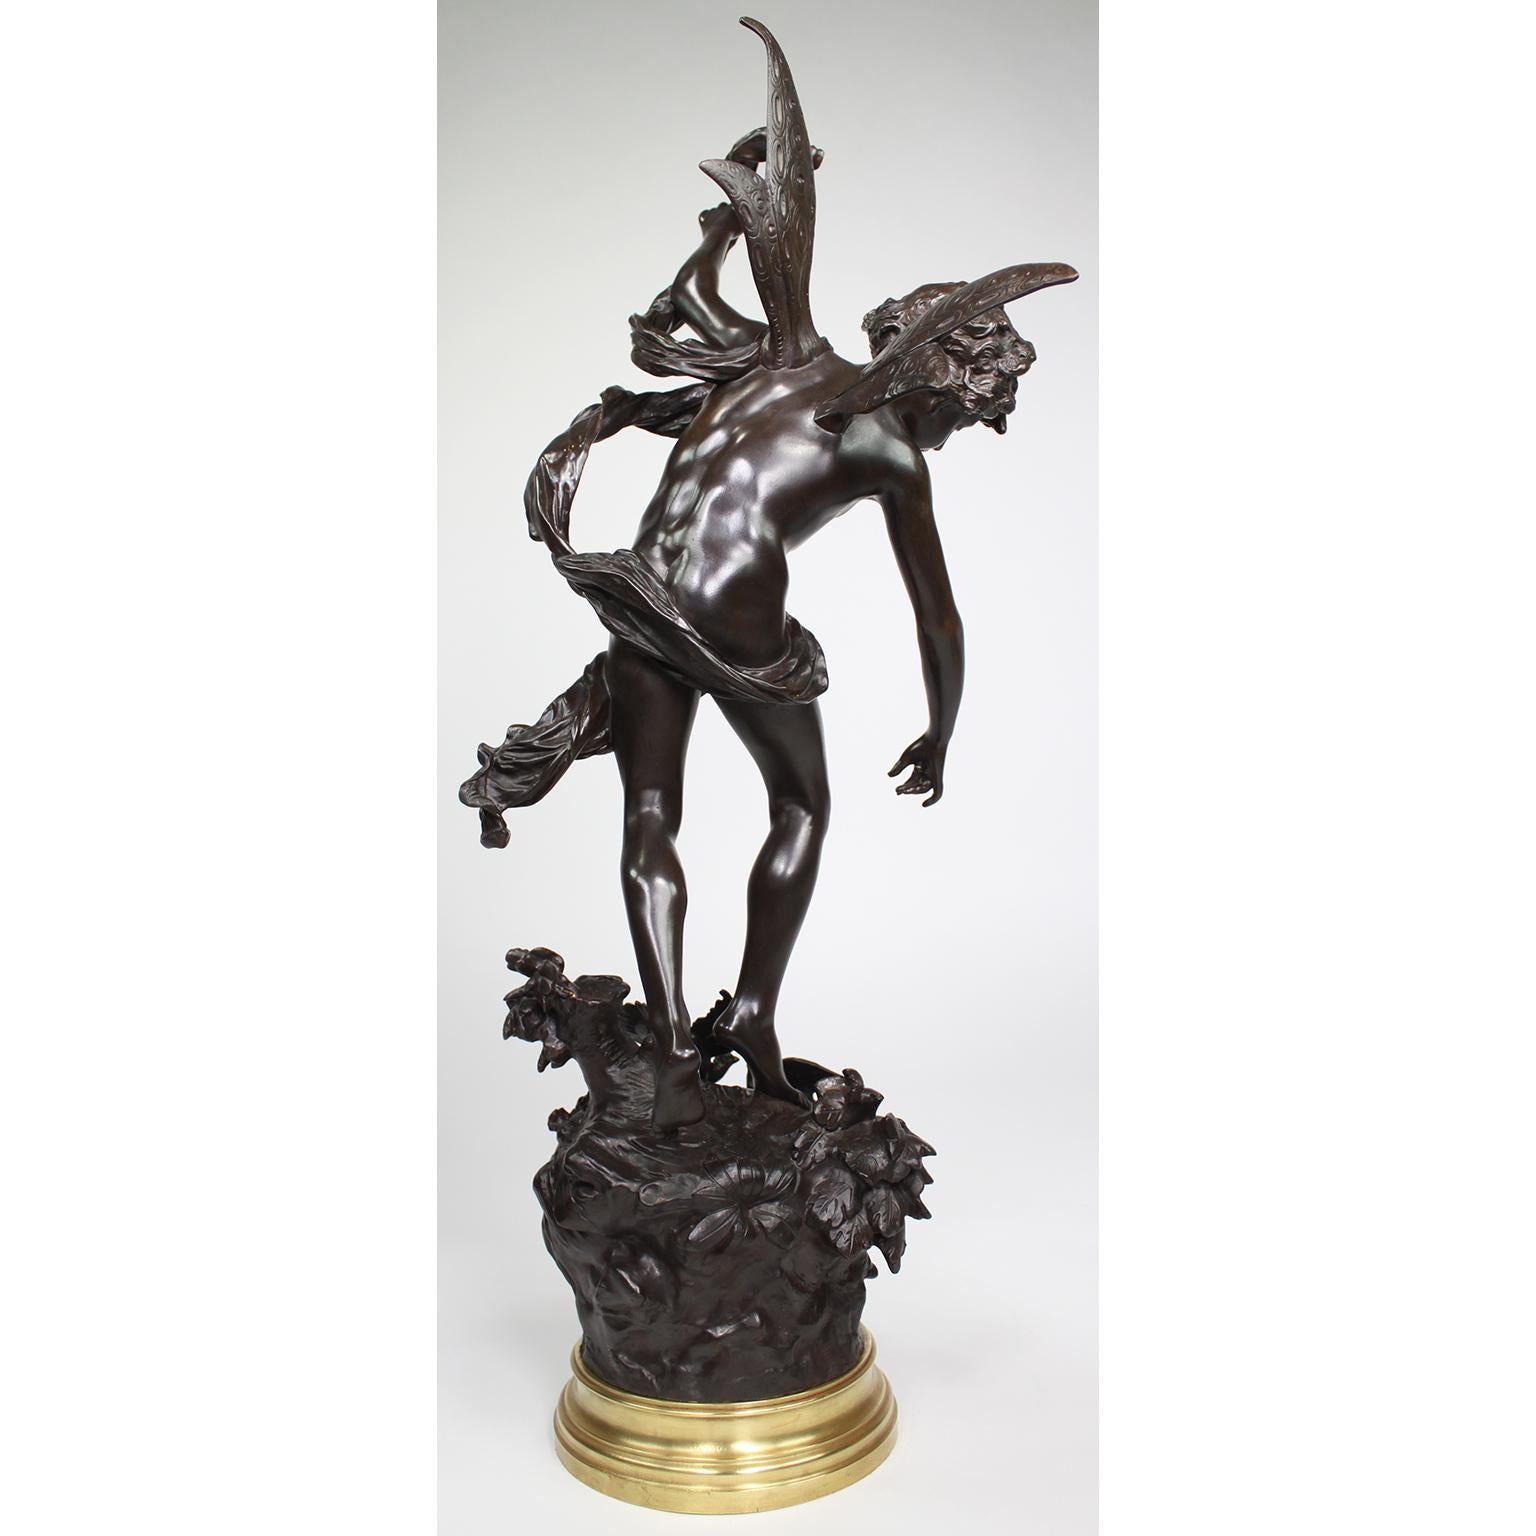 Early 20th Century French 19th/20th Century Bronze of a Fairy “Lutin des Bois”, After Luca Madrassi For Sale